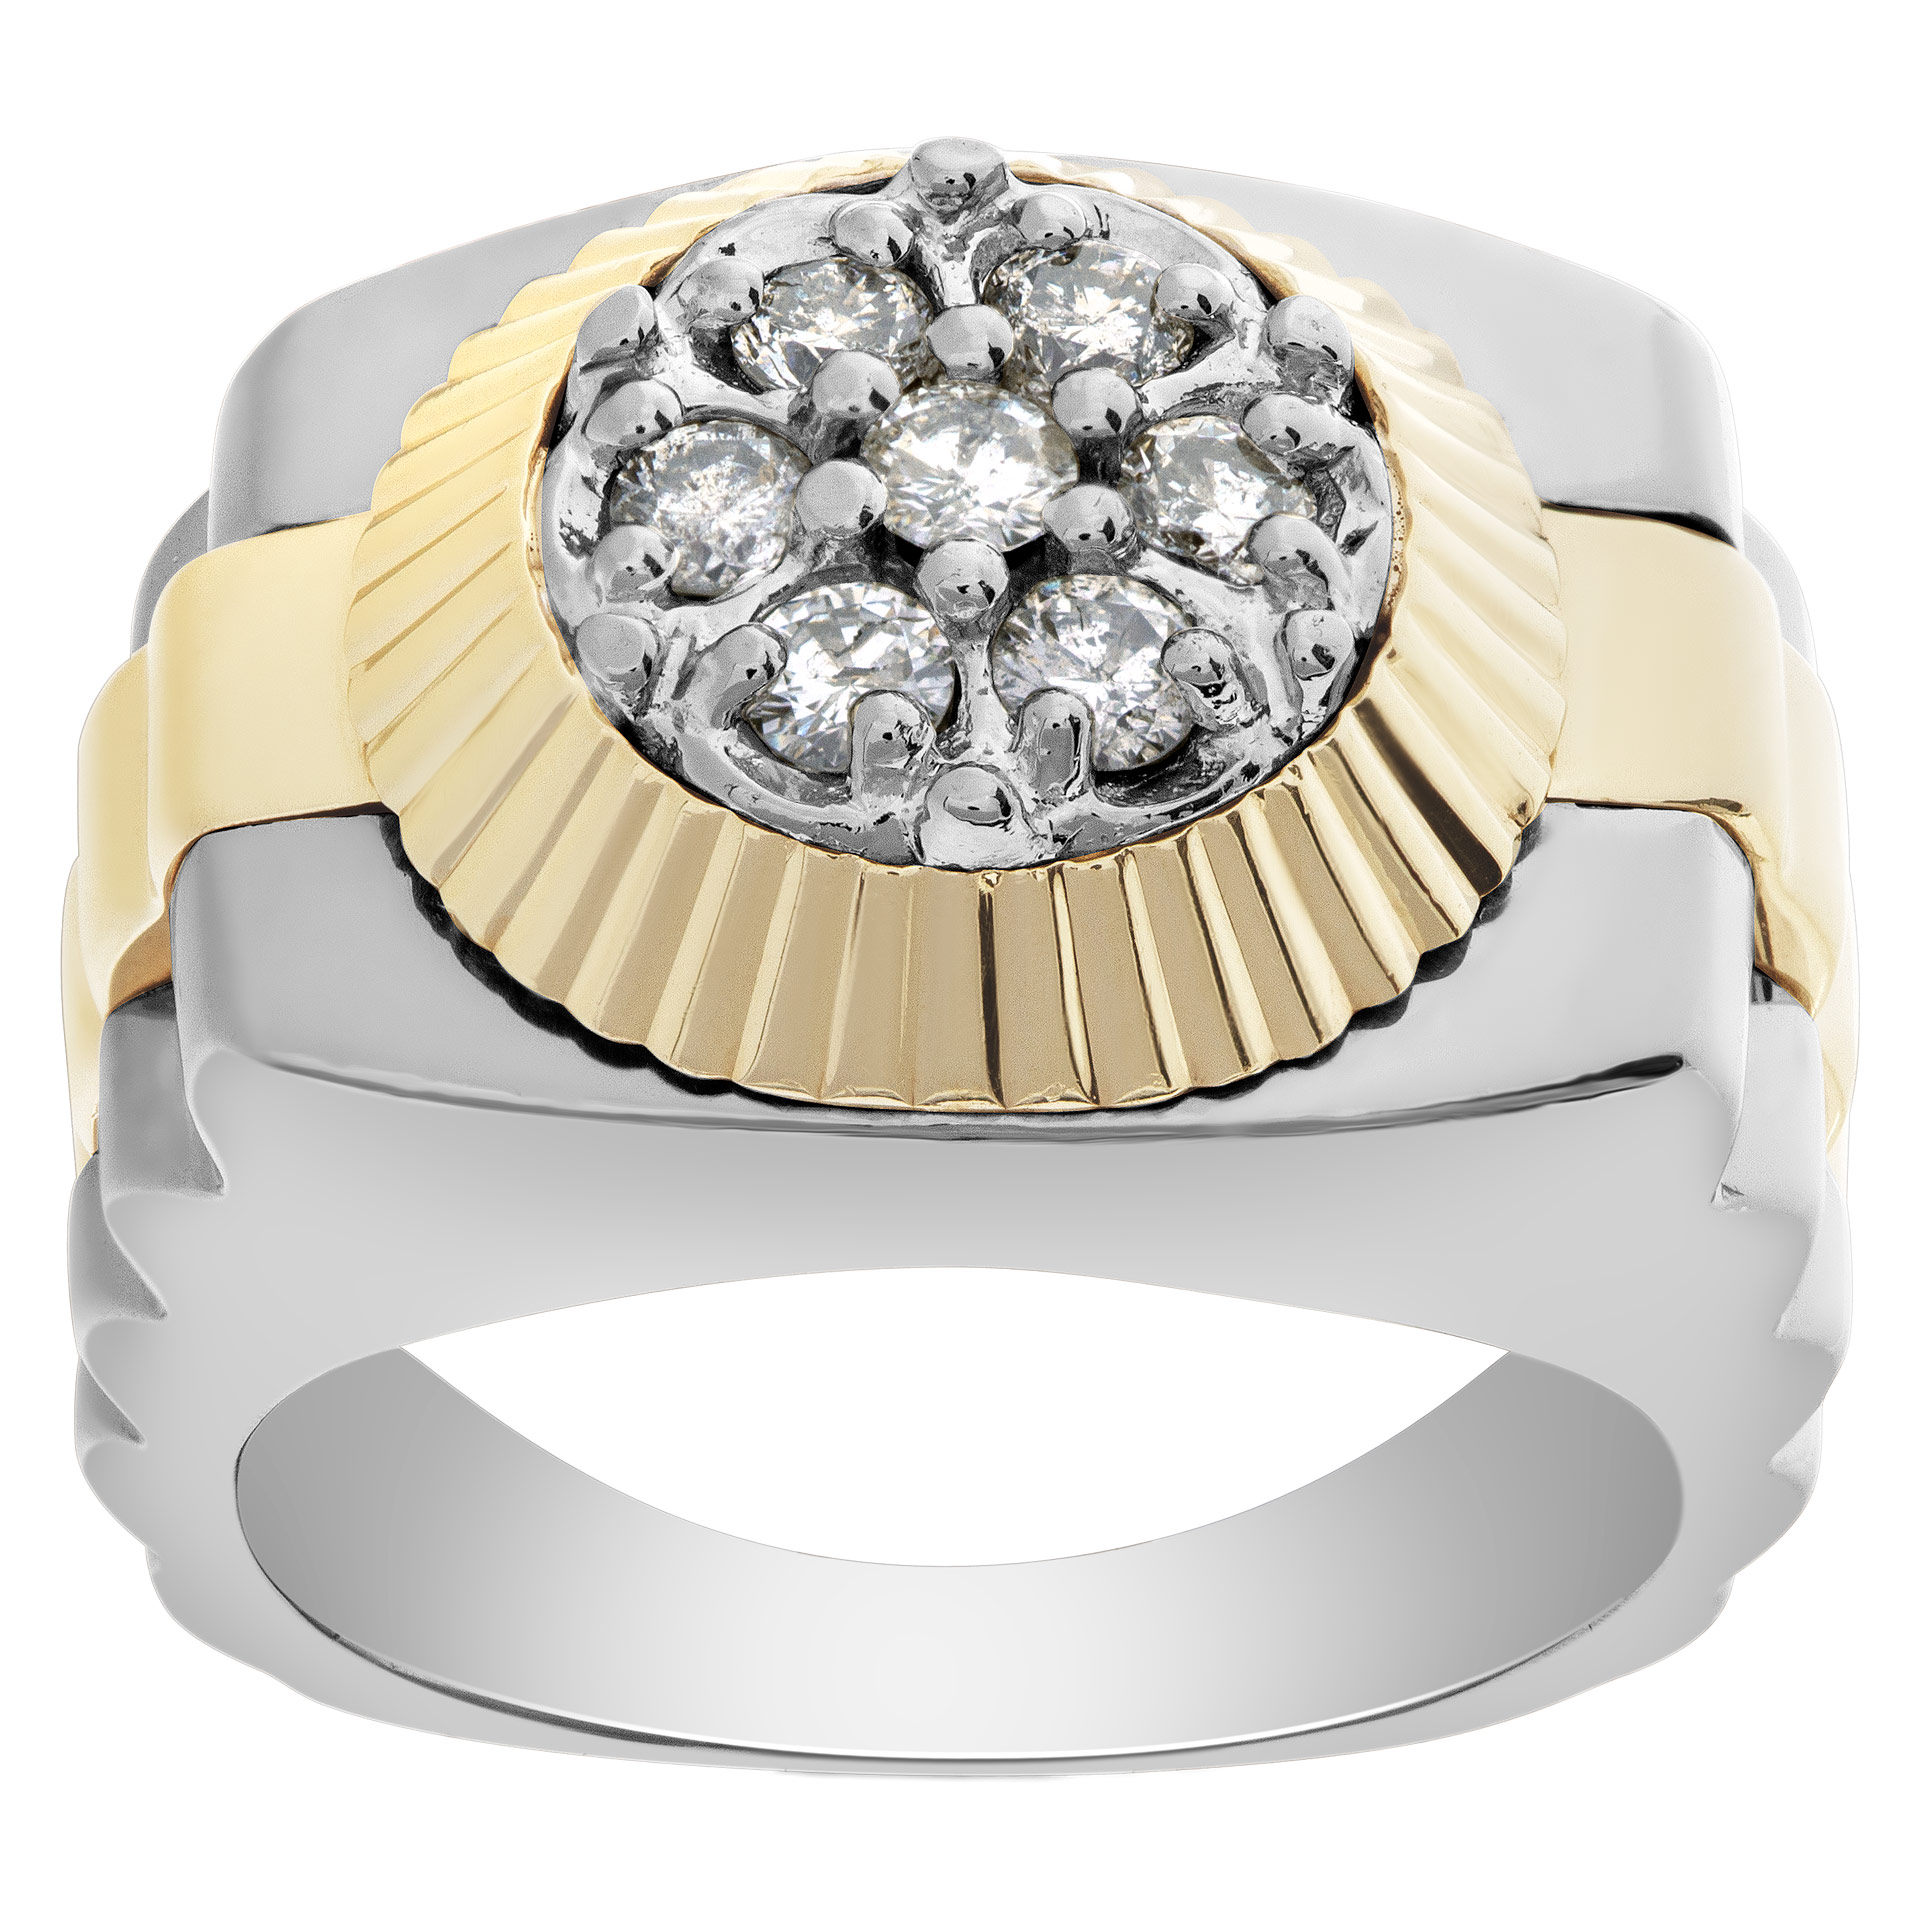 President style diamond ring in 14k white and yellow gold. image 1